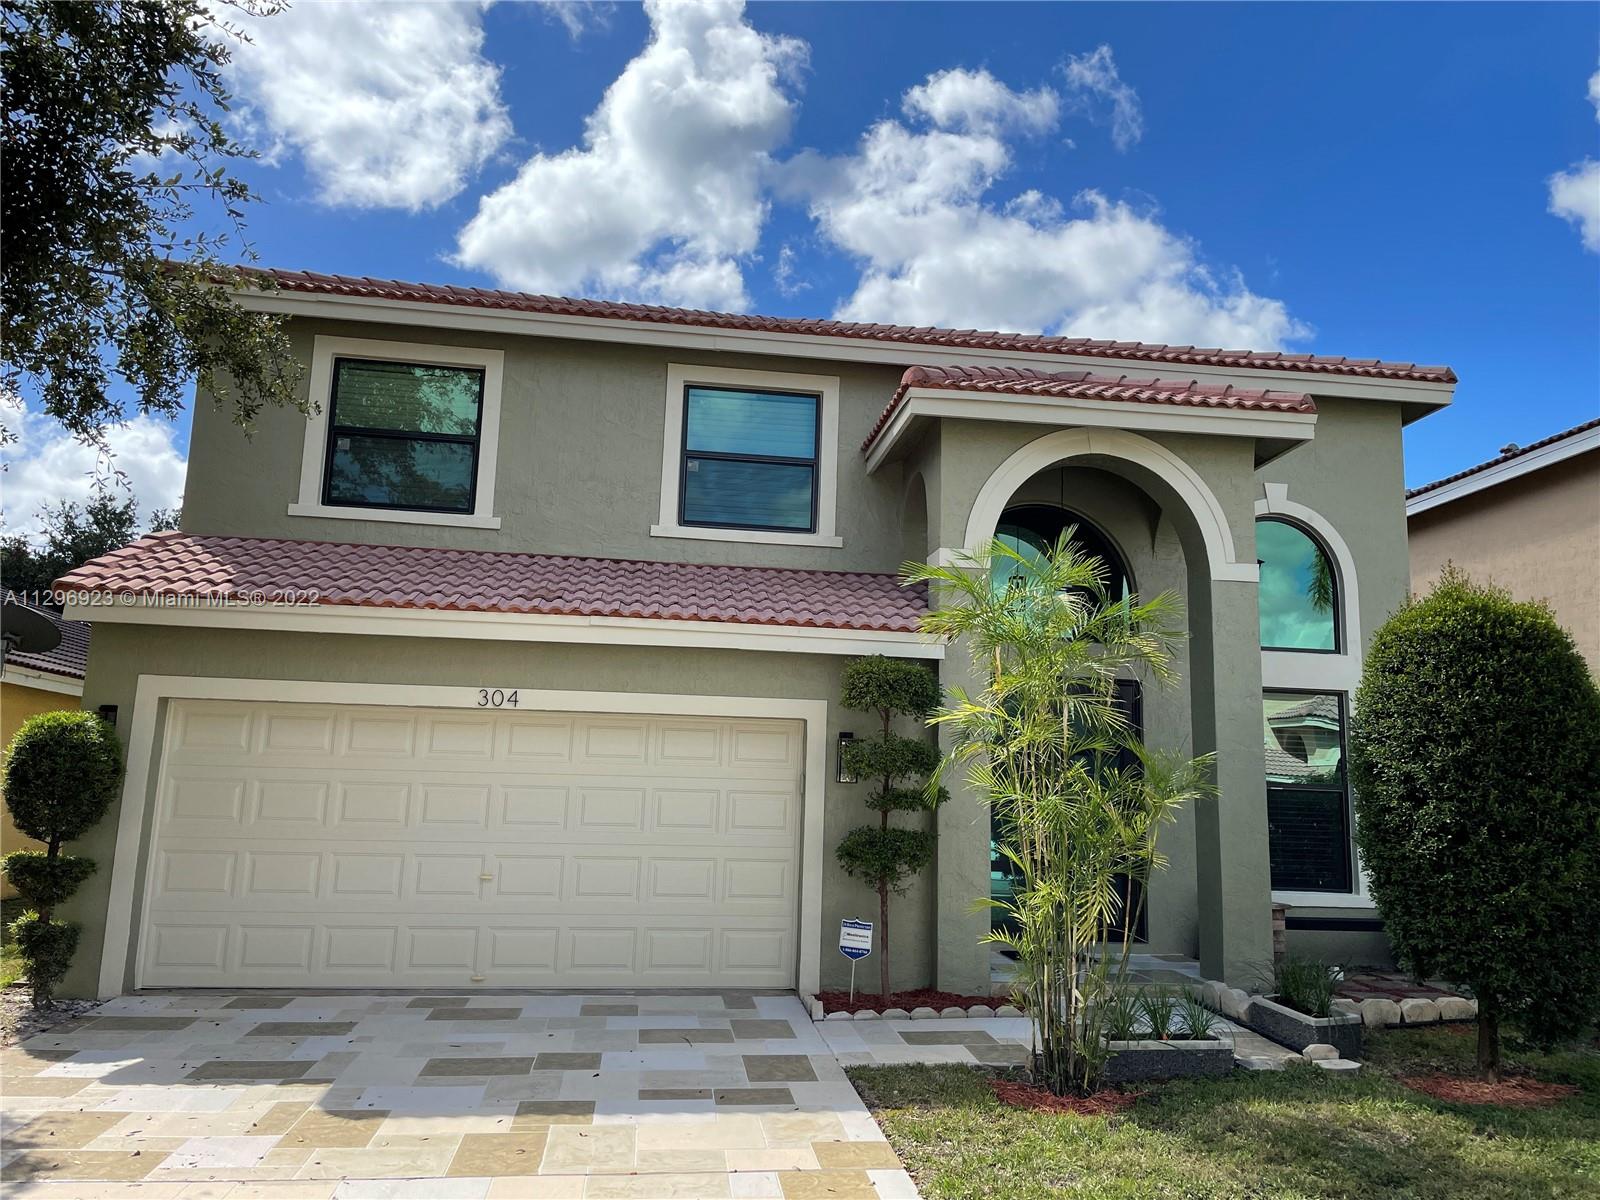 304 NW 115th Way, Coral Springs, FL 33071